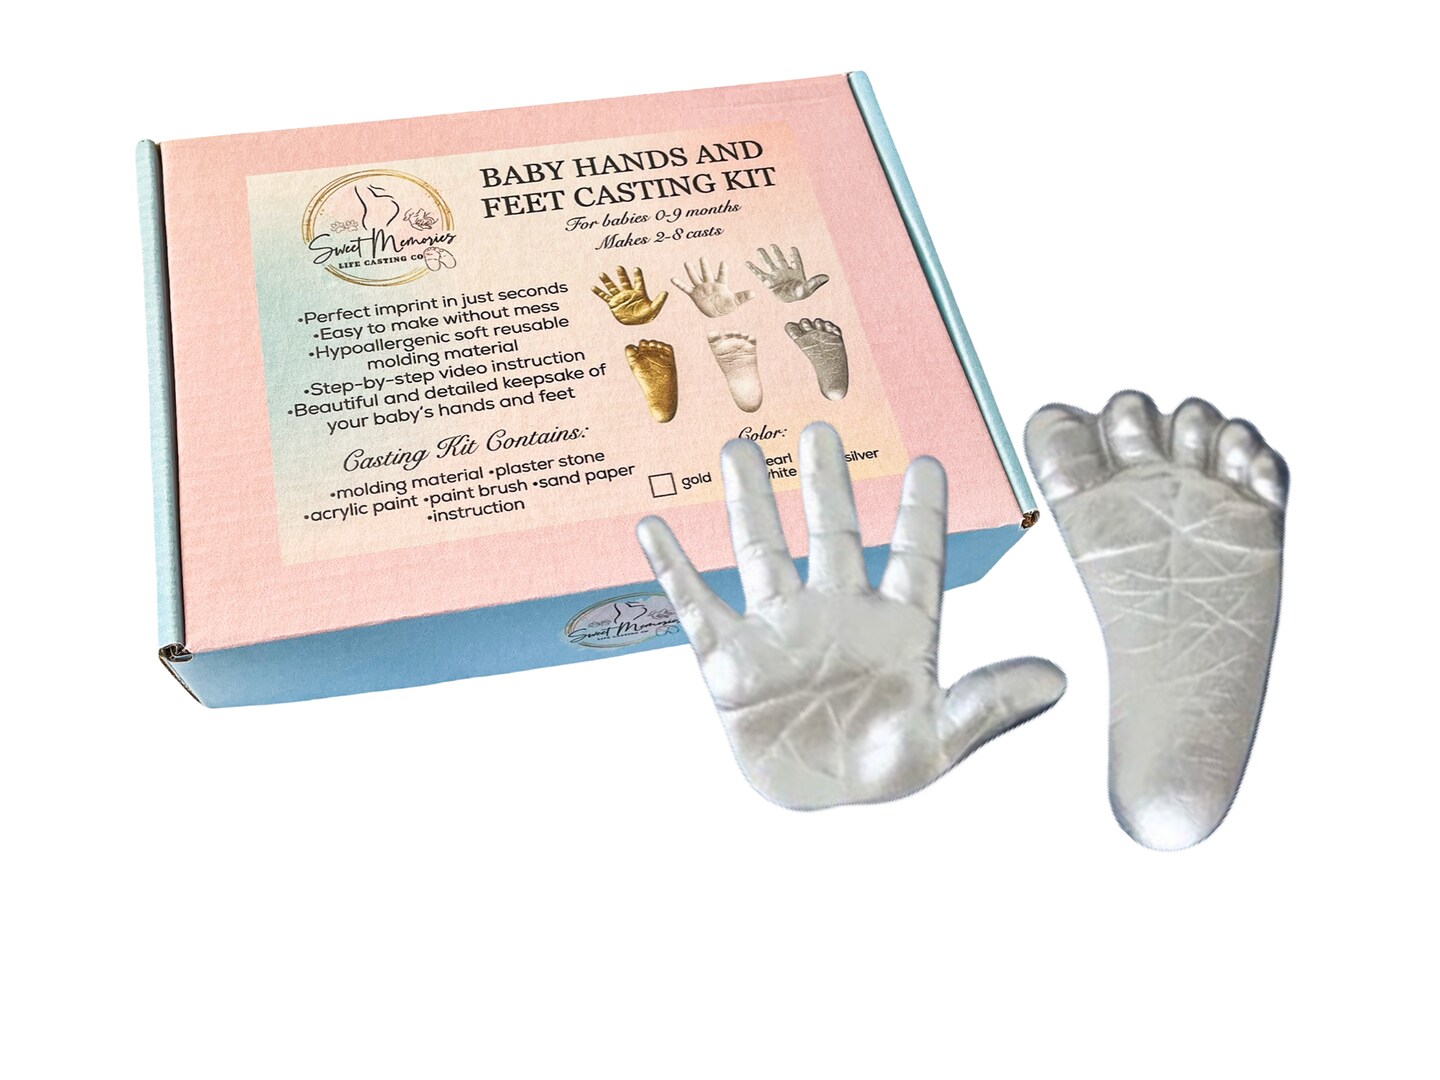 ArtMolds Hand Casting Kit, How to do Hand Casting at Home